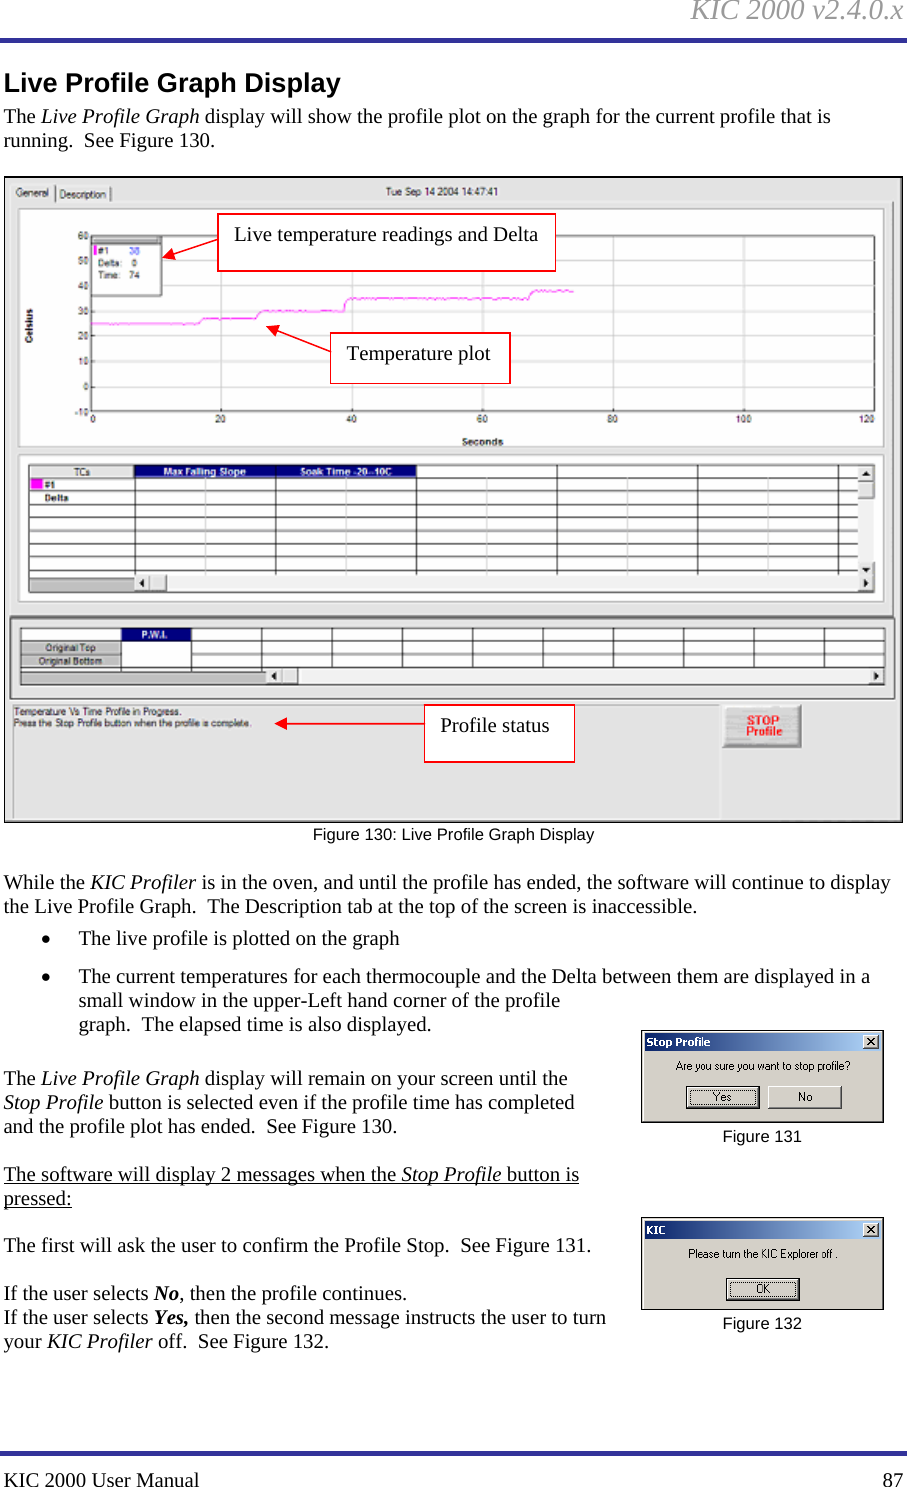 KIC 2000 v2.4.0.x KIC 2000 User Manual    87 Live Profile Graph Display The Live Profile Graph display will show the profile plot on the graph for the current profile that is running.  See Figure 130.     Figure 130: Live Profile Graph Display  While the KIC Profiler is in the oven, and until the profile has ended, the software will continue to display the Live Profile Graph.  The Description tab at the top of the screen is inaccessible. • The live profile is plotted on the graph • The current temperatures for each thermocouple and the Delta between them are displayed in a small window in the upper-Left hand corner of the profile graph.  The elapsed time is also displayed.  The Live Profile Graph display will remain on your screen until the Stop Profile button is selected even if the profile time has completed and the profile plot has ended.  See Figure 130.    The software will display 2 messages when the Stop Profile button is pressed:  The first will ask the user to confirm the Profile Stop.  See Figure 131.    If the user selects No, then the profile continues.  If the user selects Yes, then the second message instructs the user to turn your KIC Profiler off.  See Figure 132.      Figure 131  Figure 132 Temperature plot Profile status Live temperature readings and Delta 